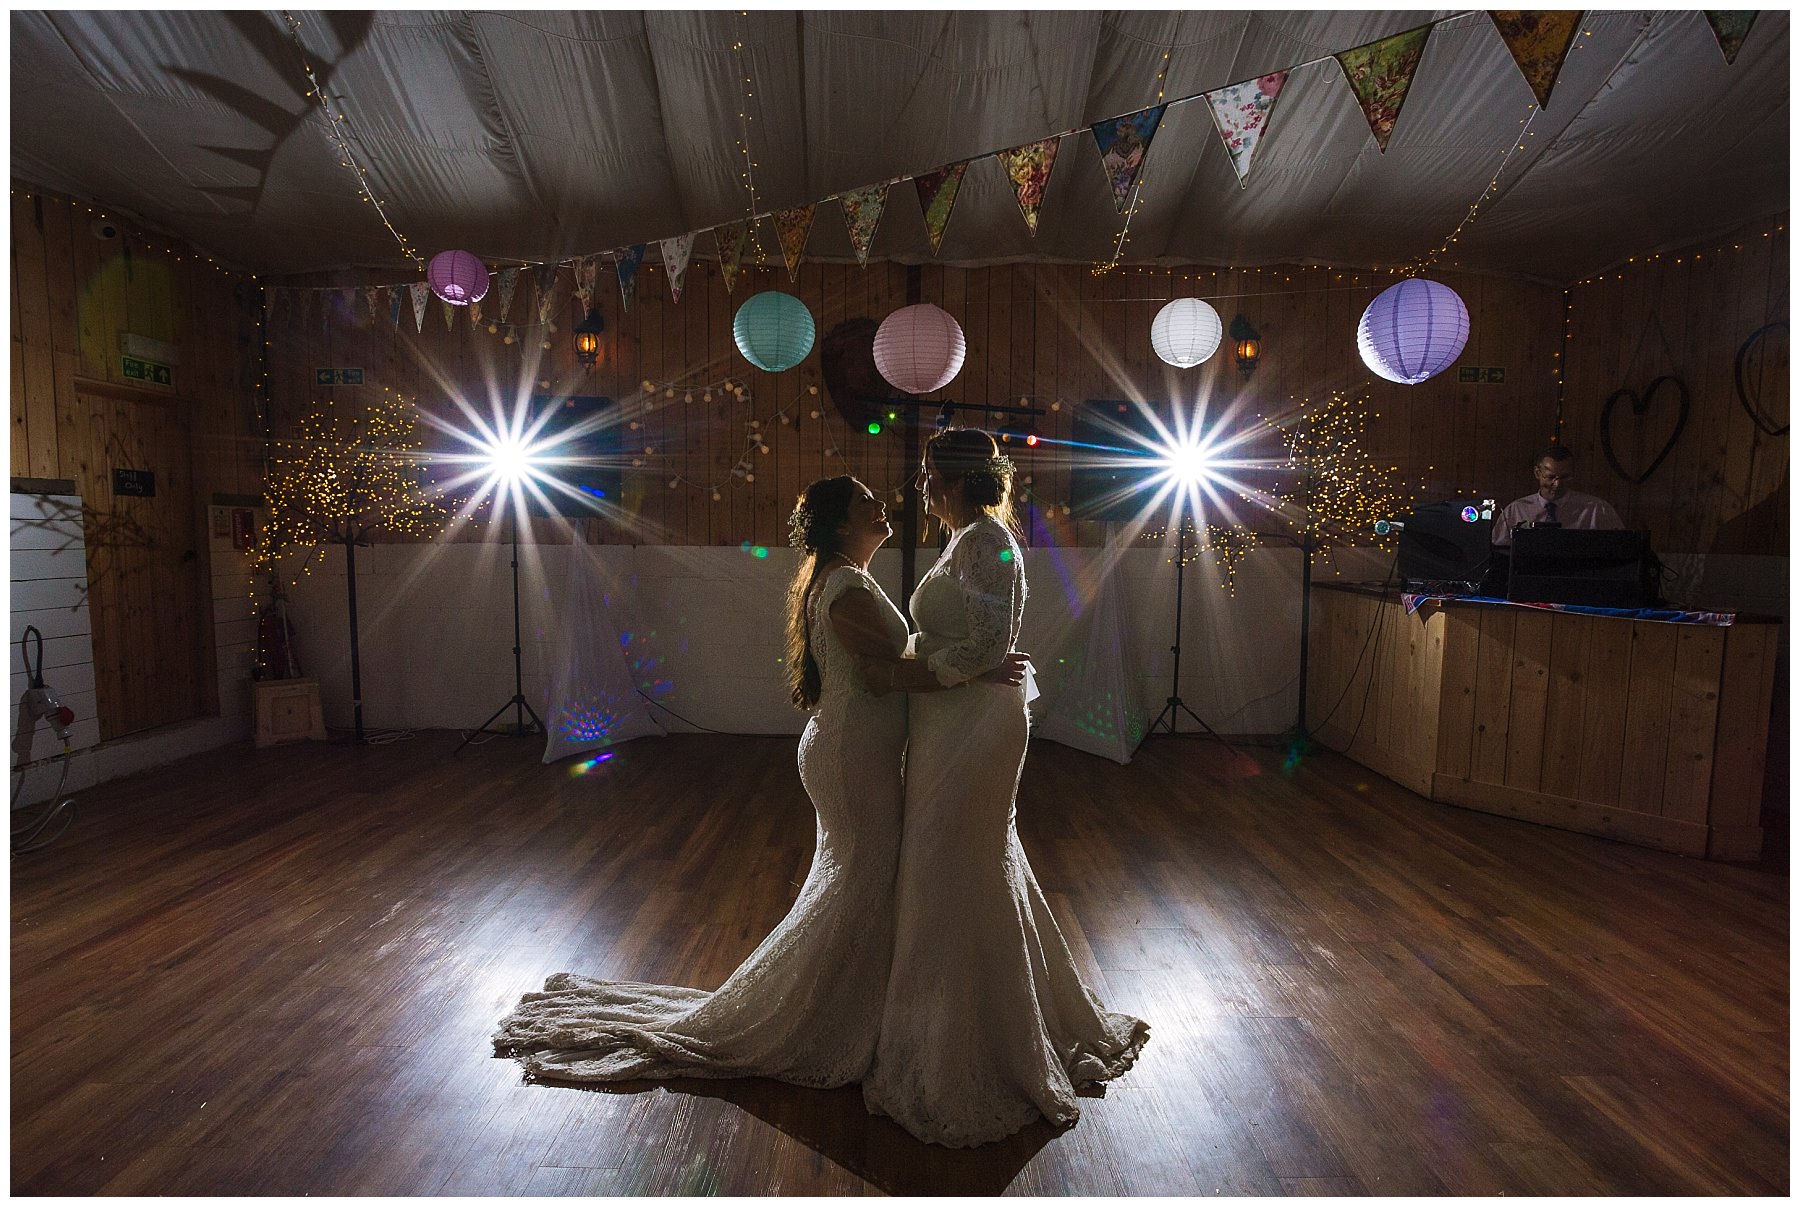 First dance at the wellbeing farm